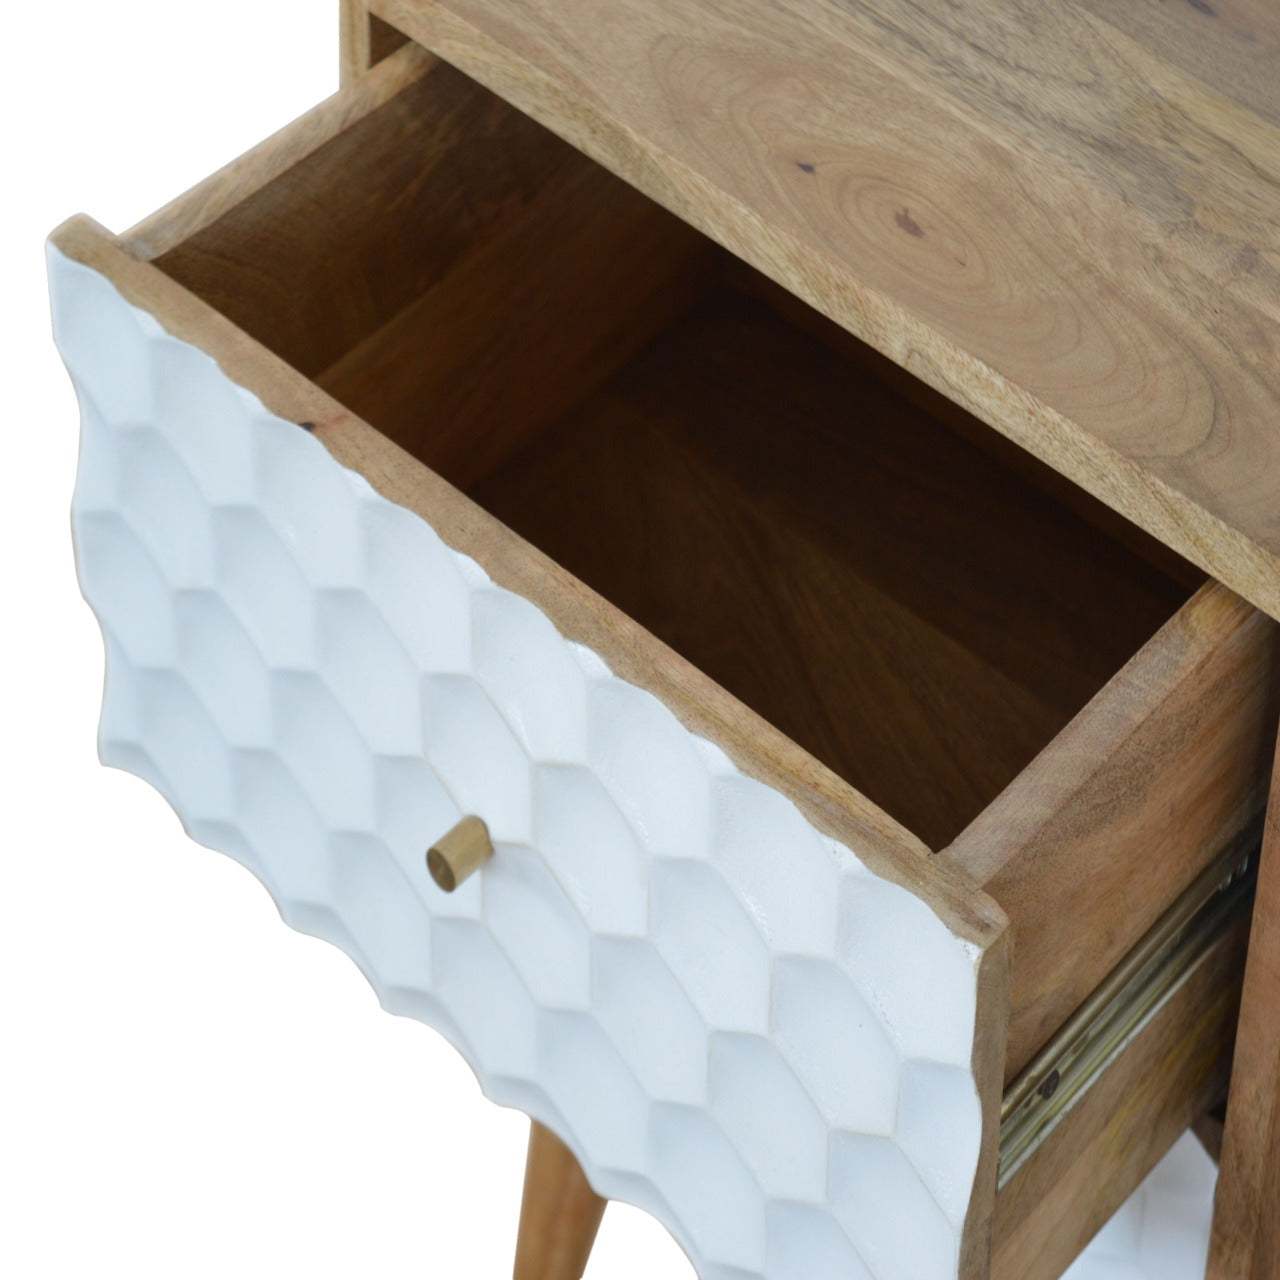 Honeycomb Carved Bedside Table Wood and White with 2 Drawers and Gold Handles